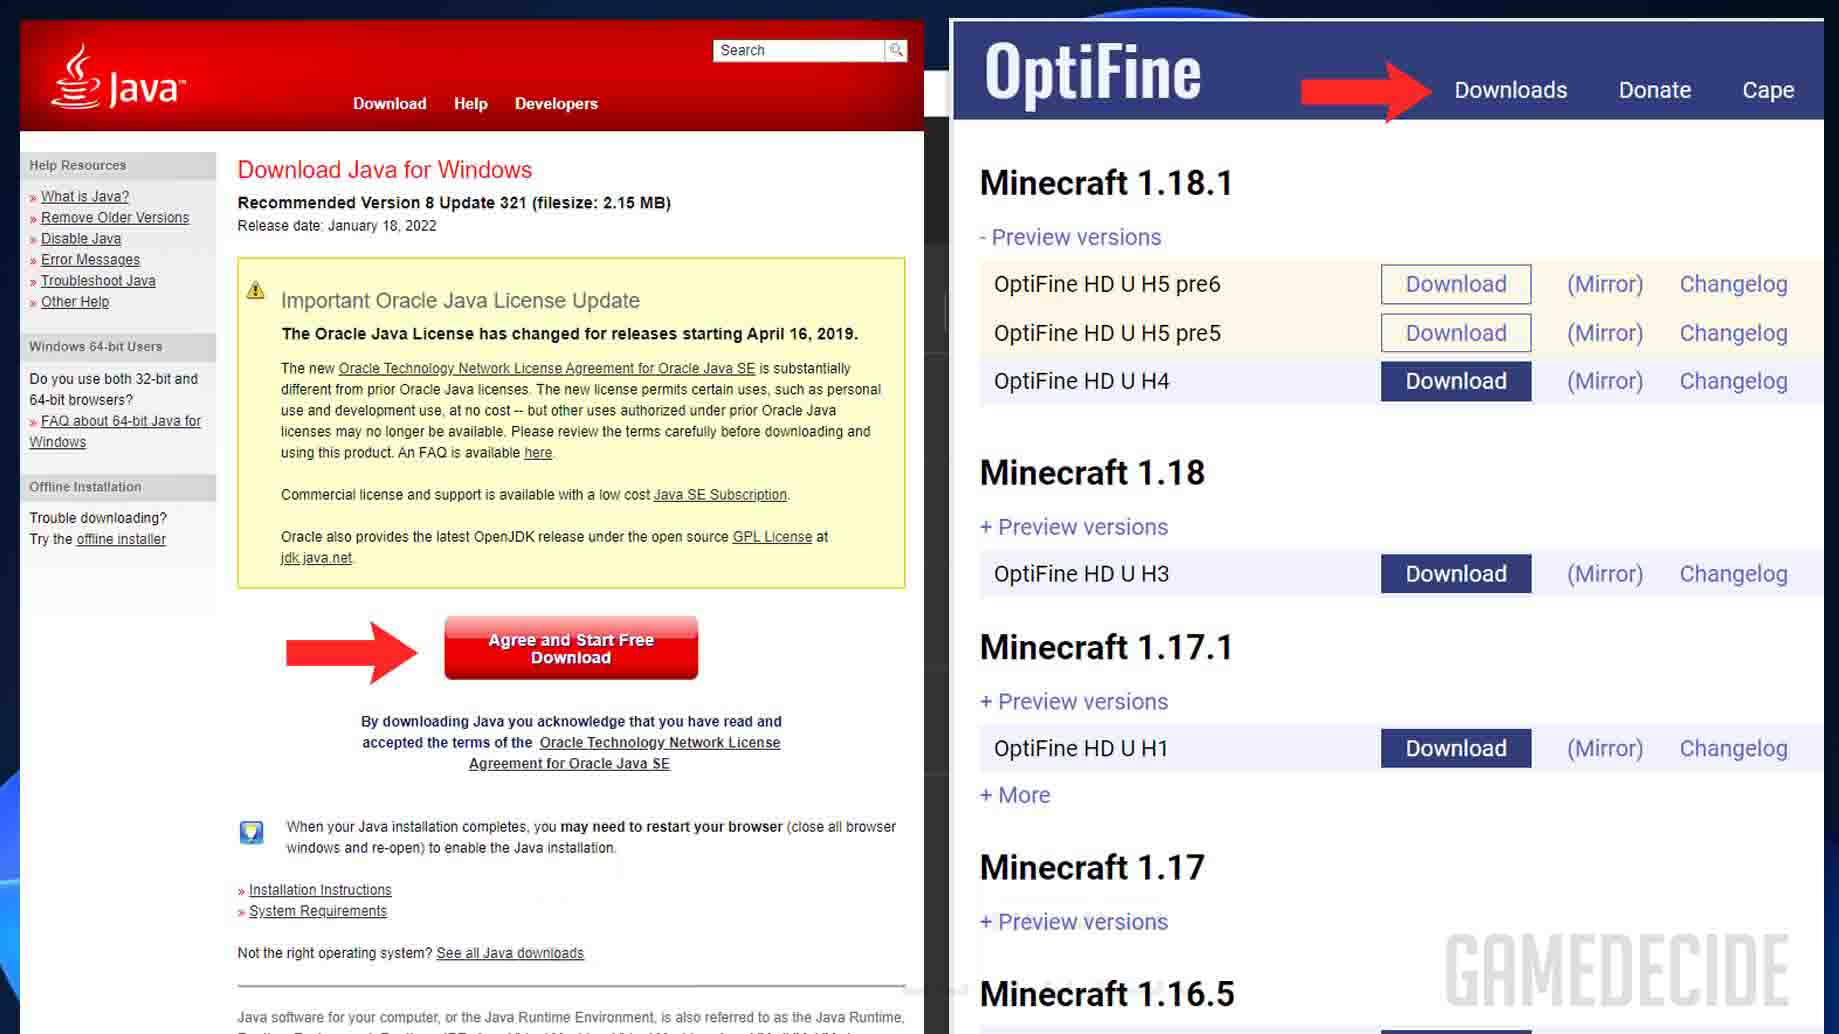 How to Install OptiFine in Minecraft Java Edition